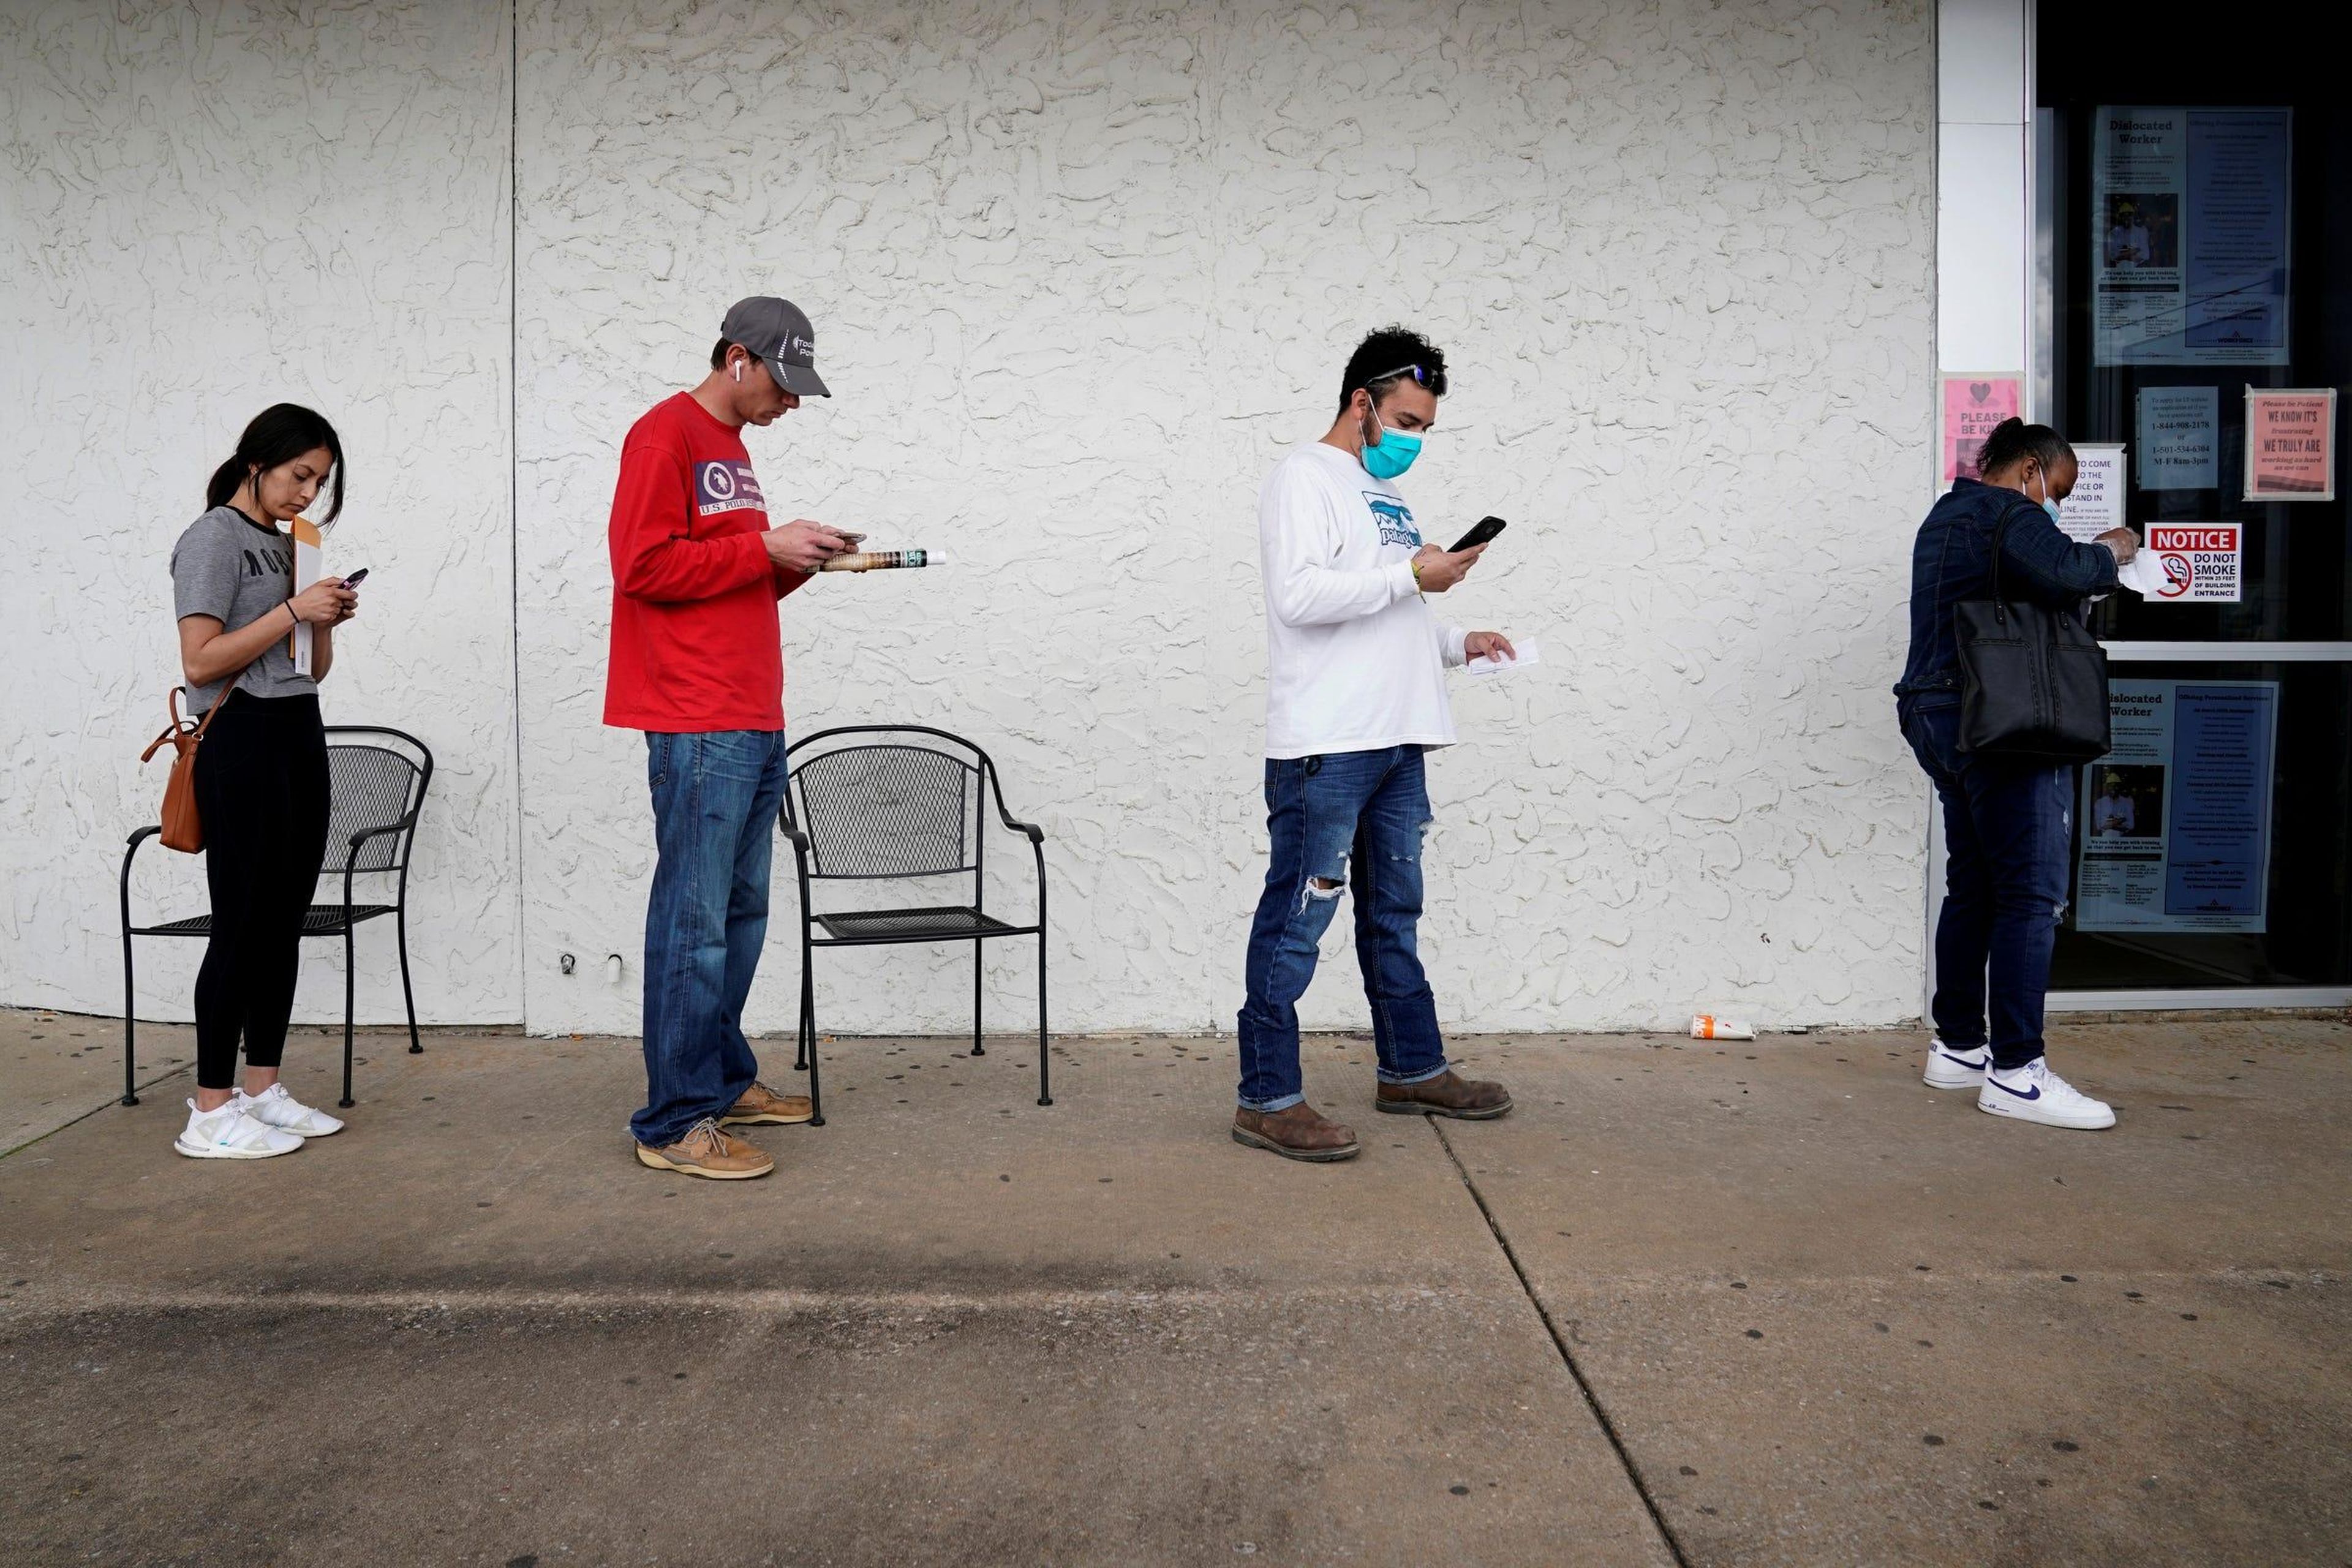 People wait in line to file for unemployment at an Arkansas Workforce Center in Fayetteville, Arkansas, on April 6, 2020. Nick Oxford/Reuters